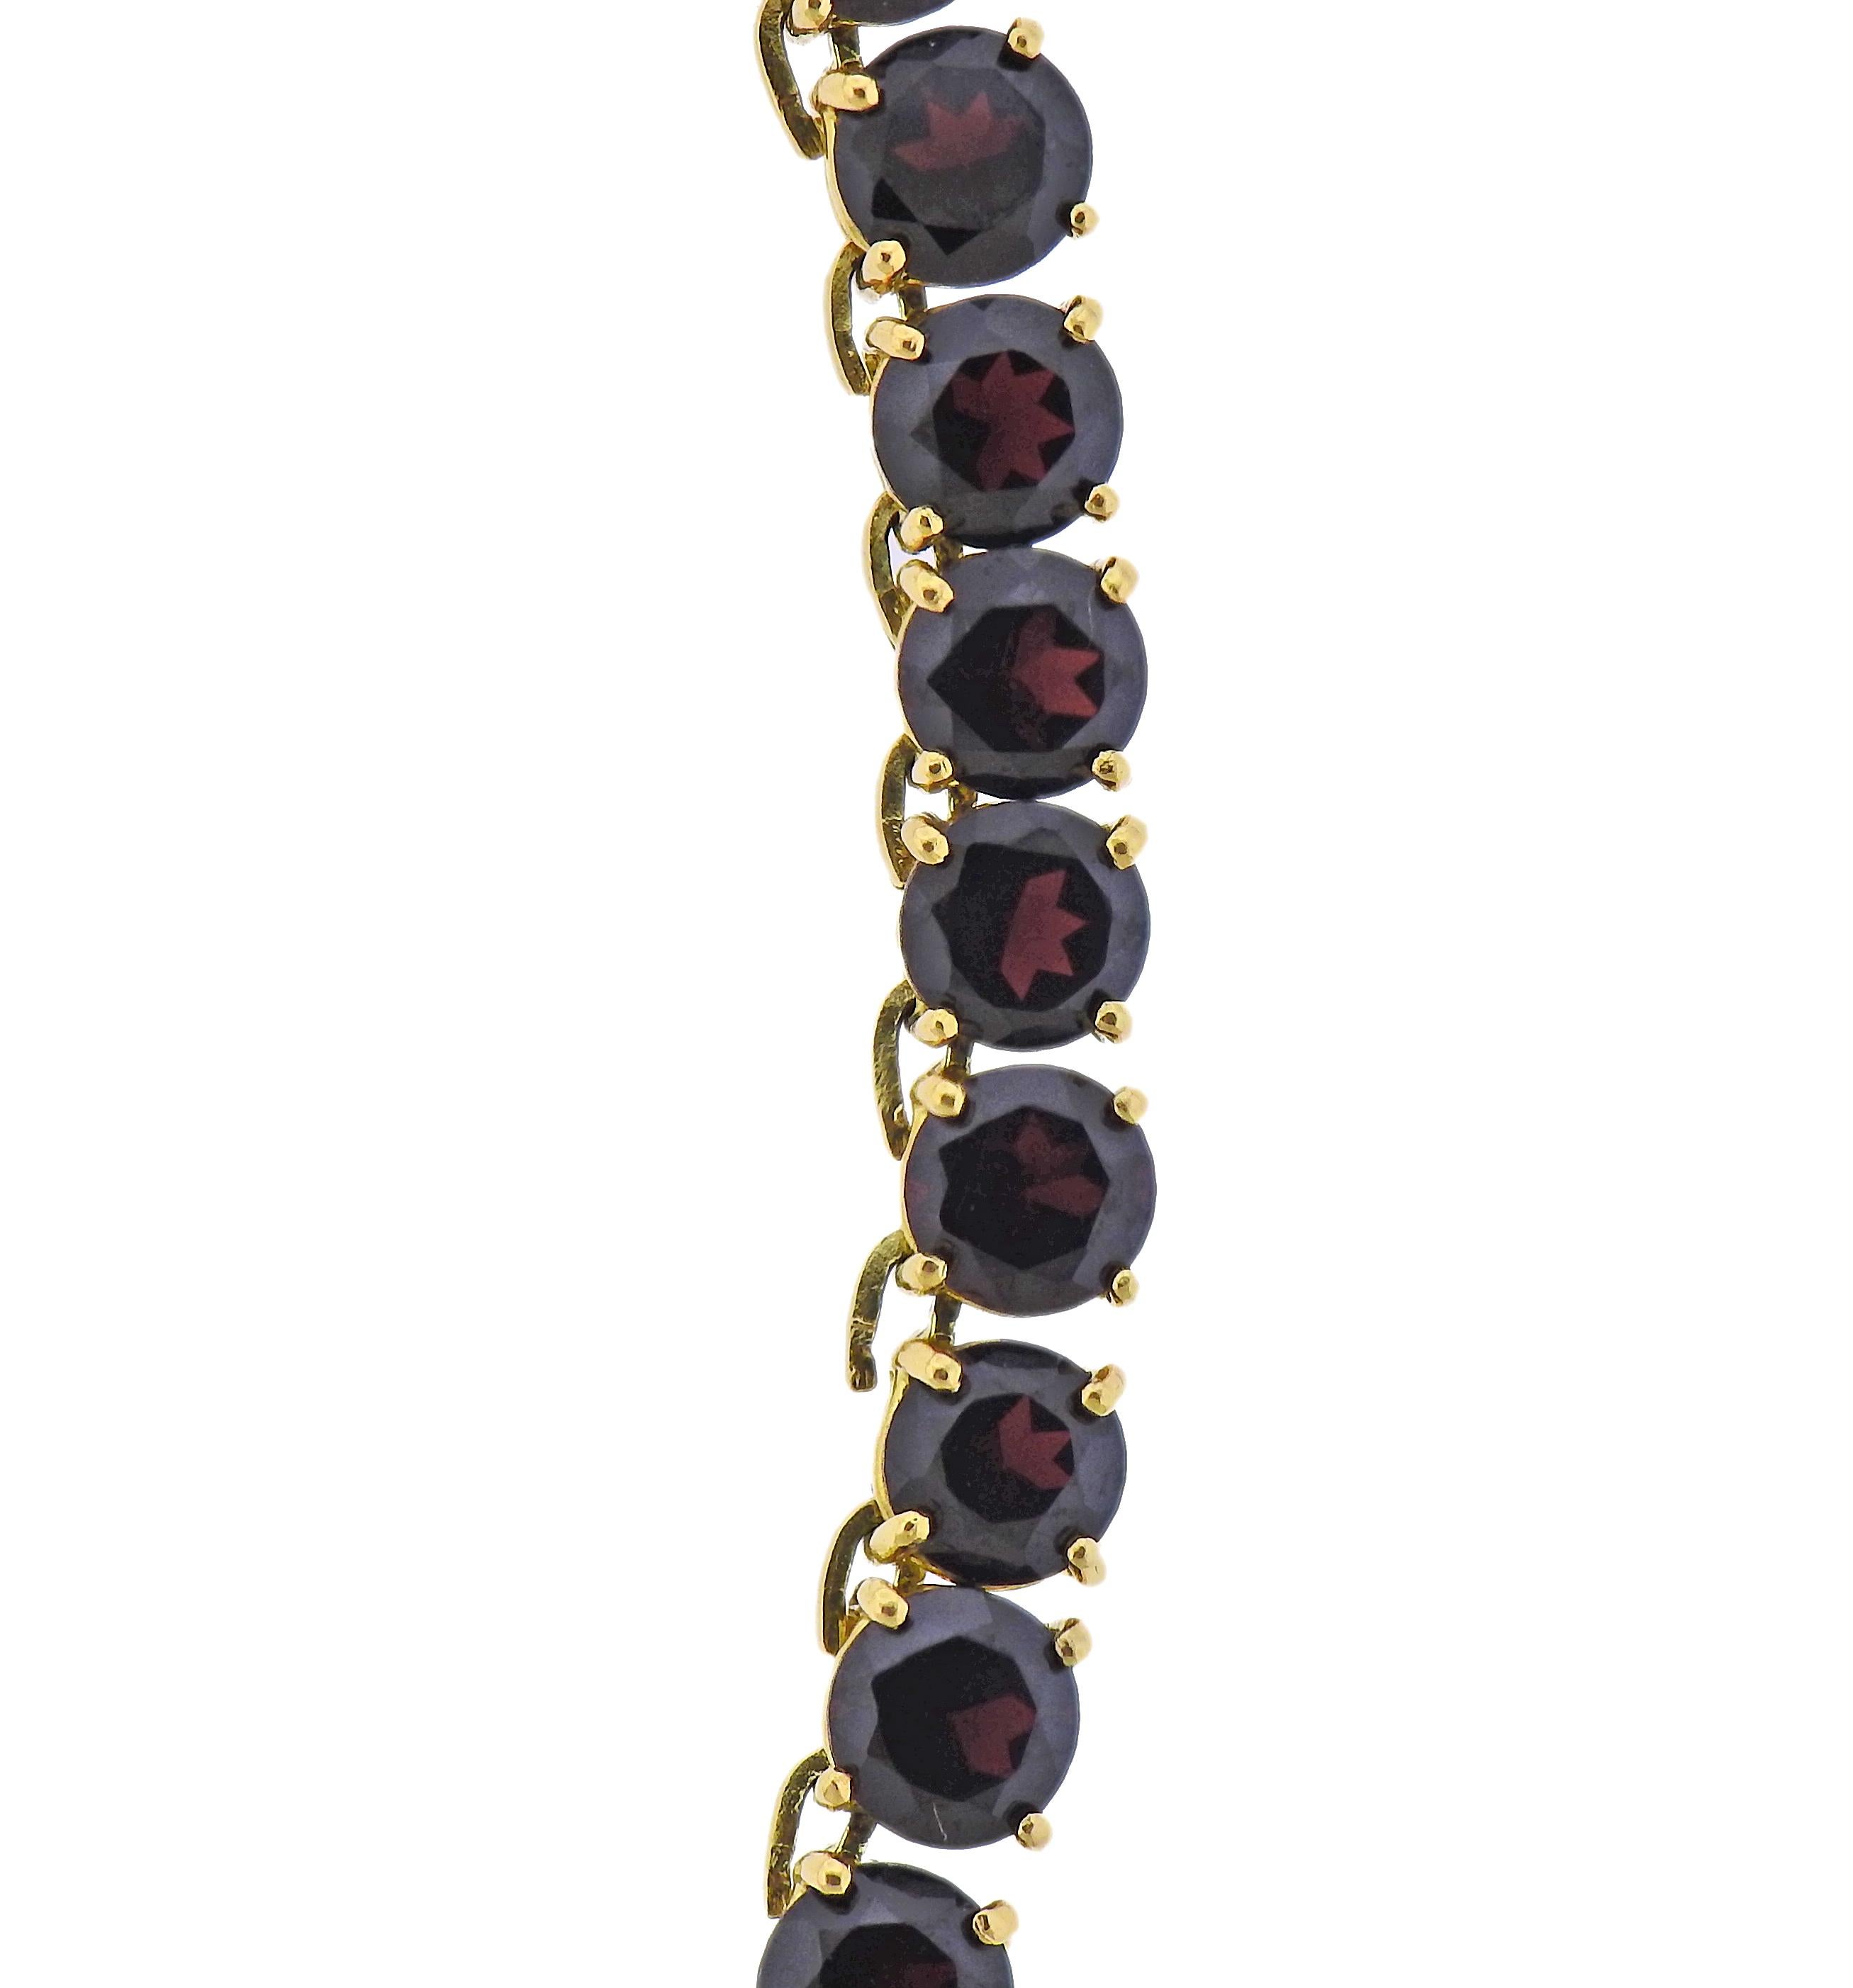 18k gold riviera necklace with garnets, measuring from 6mm to 6.2mm. Necklace is 16.5